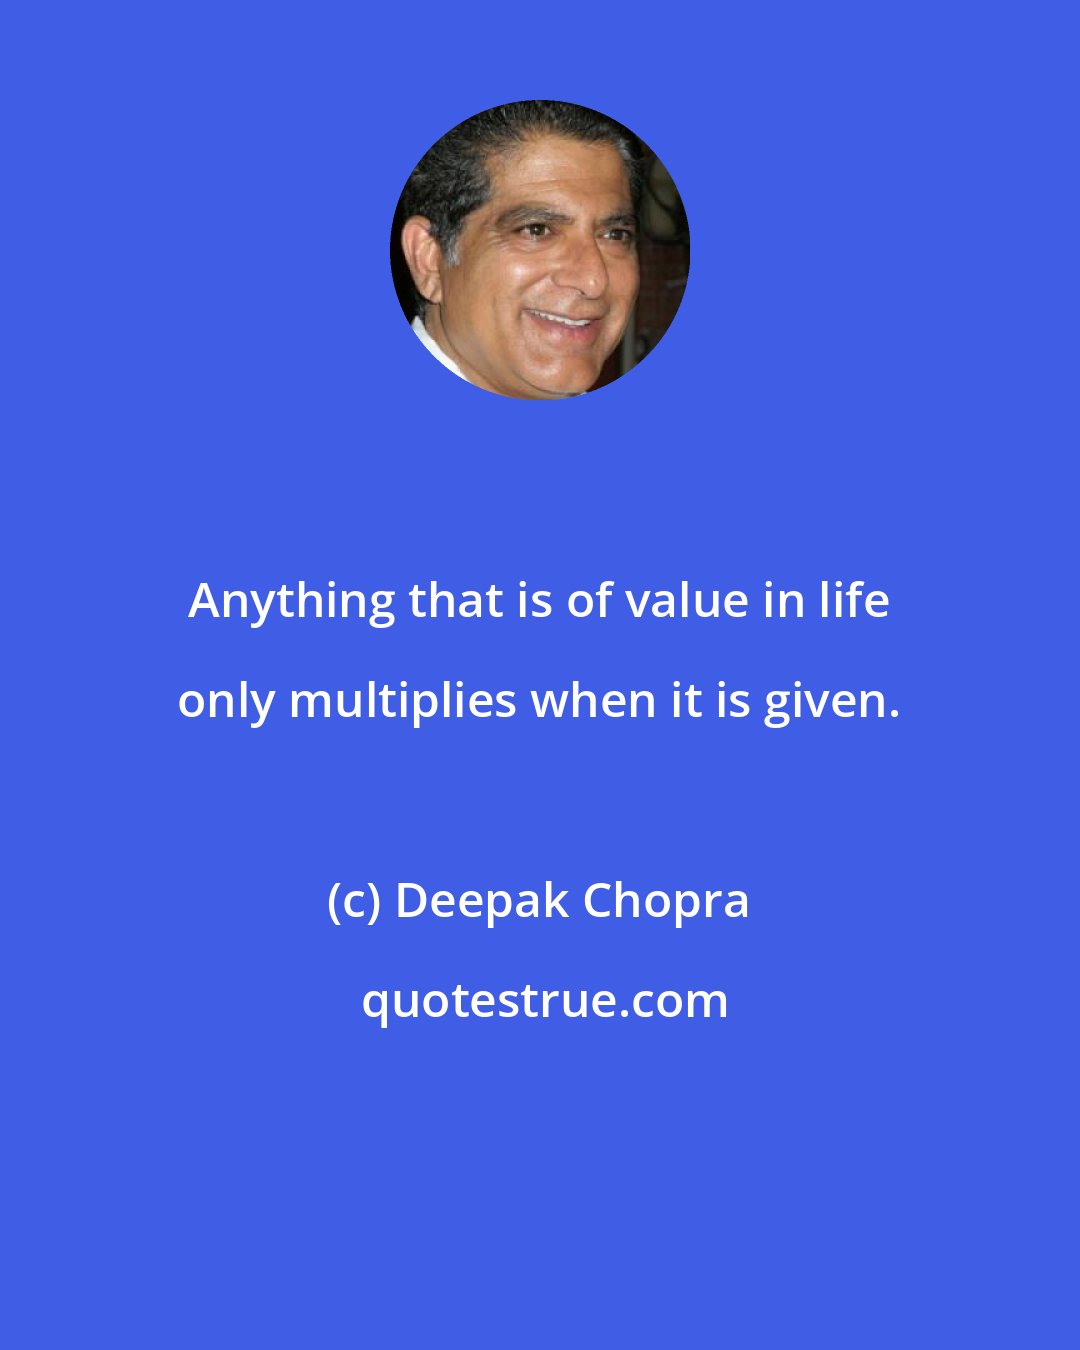 Deepak Chopra: Anything that is of value in life only multiplies when it is given.